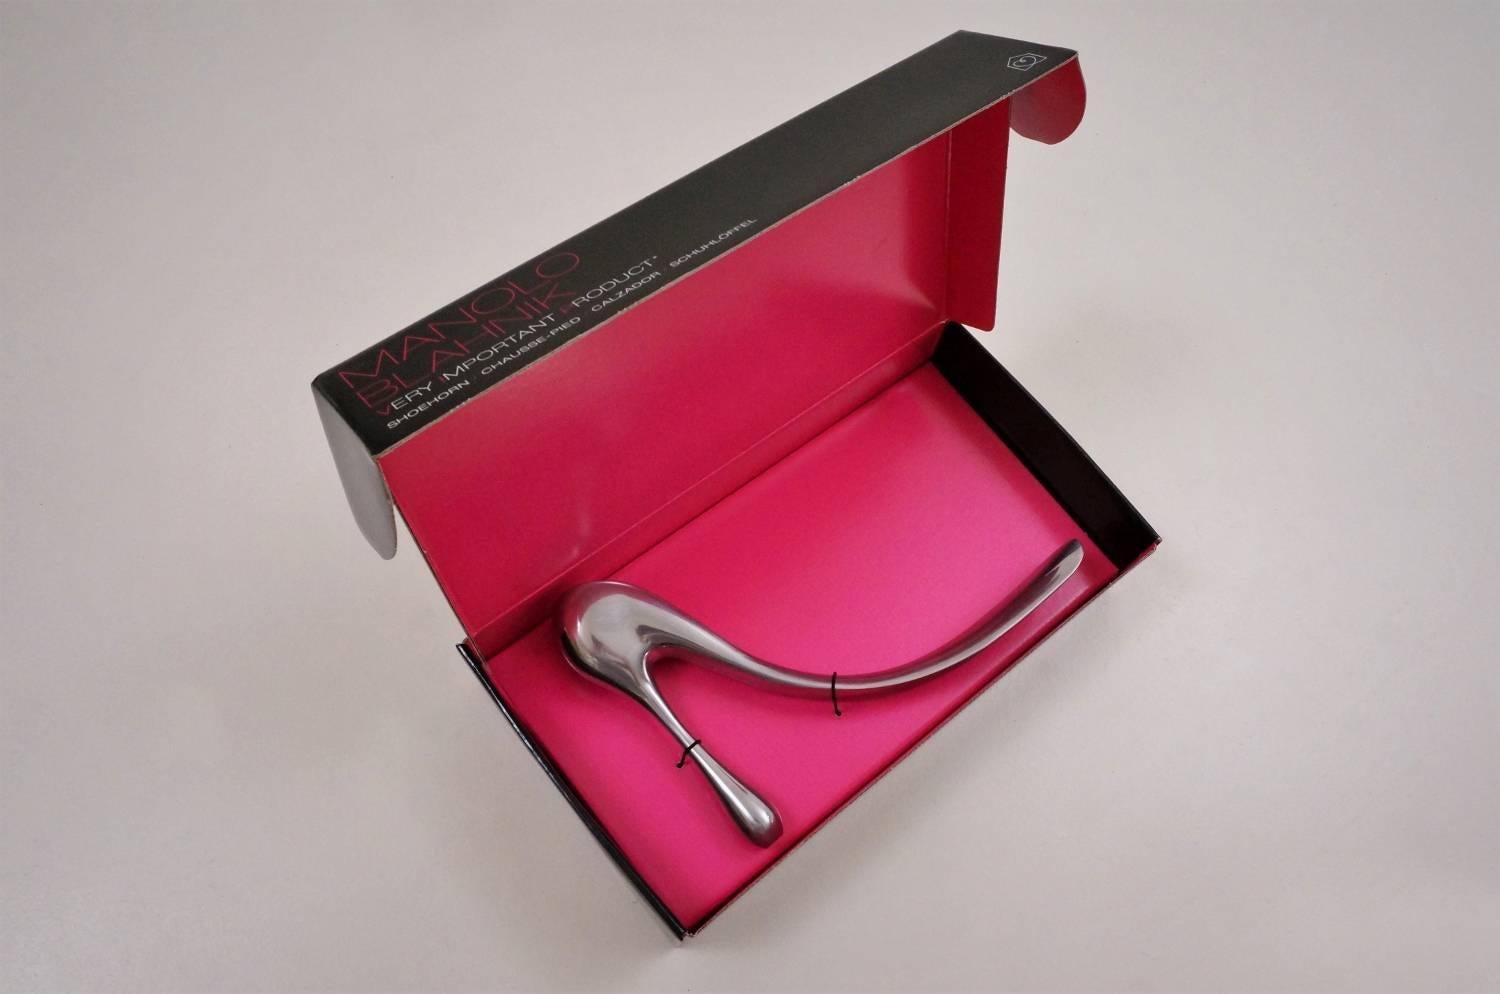 Manolo Blahnik shoe horn polished cast aluminium with original box, 2004, English.

Manolo Blahnik`s iconic shoe horn was a collaboration with UK based store Habitat, to celebrating its 40th anniversary in 2004.

The original box includes the